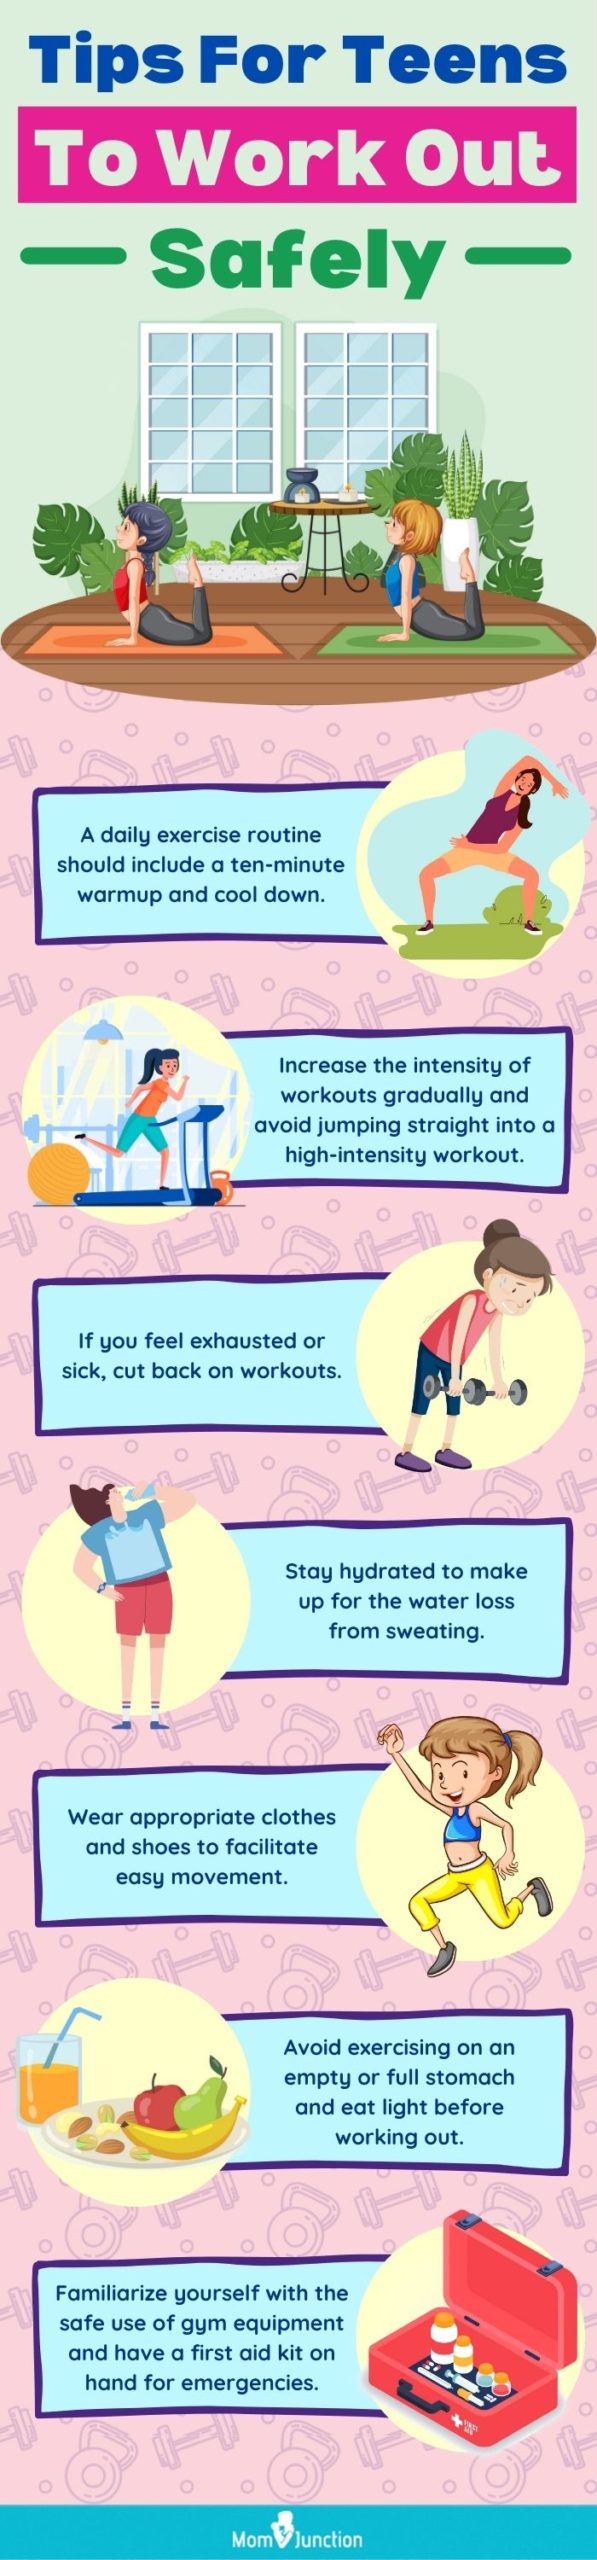 tips for teens to work out safely [infographic]